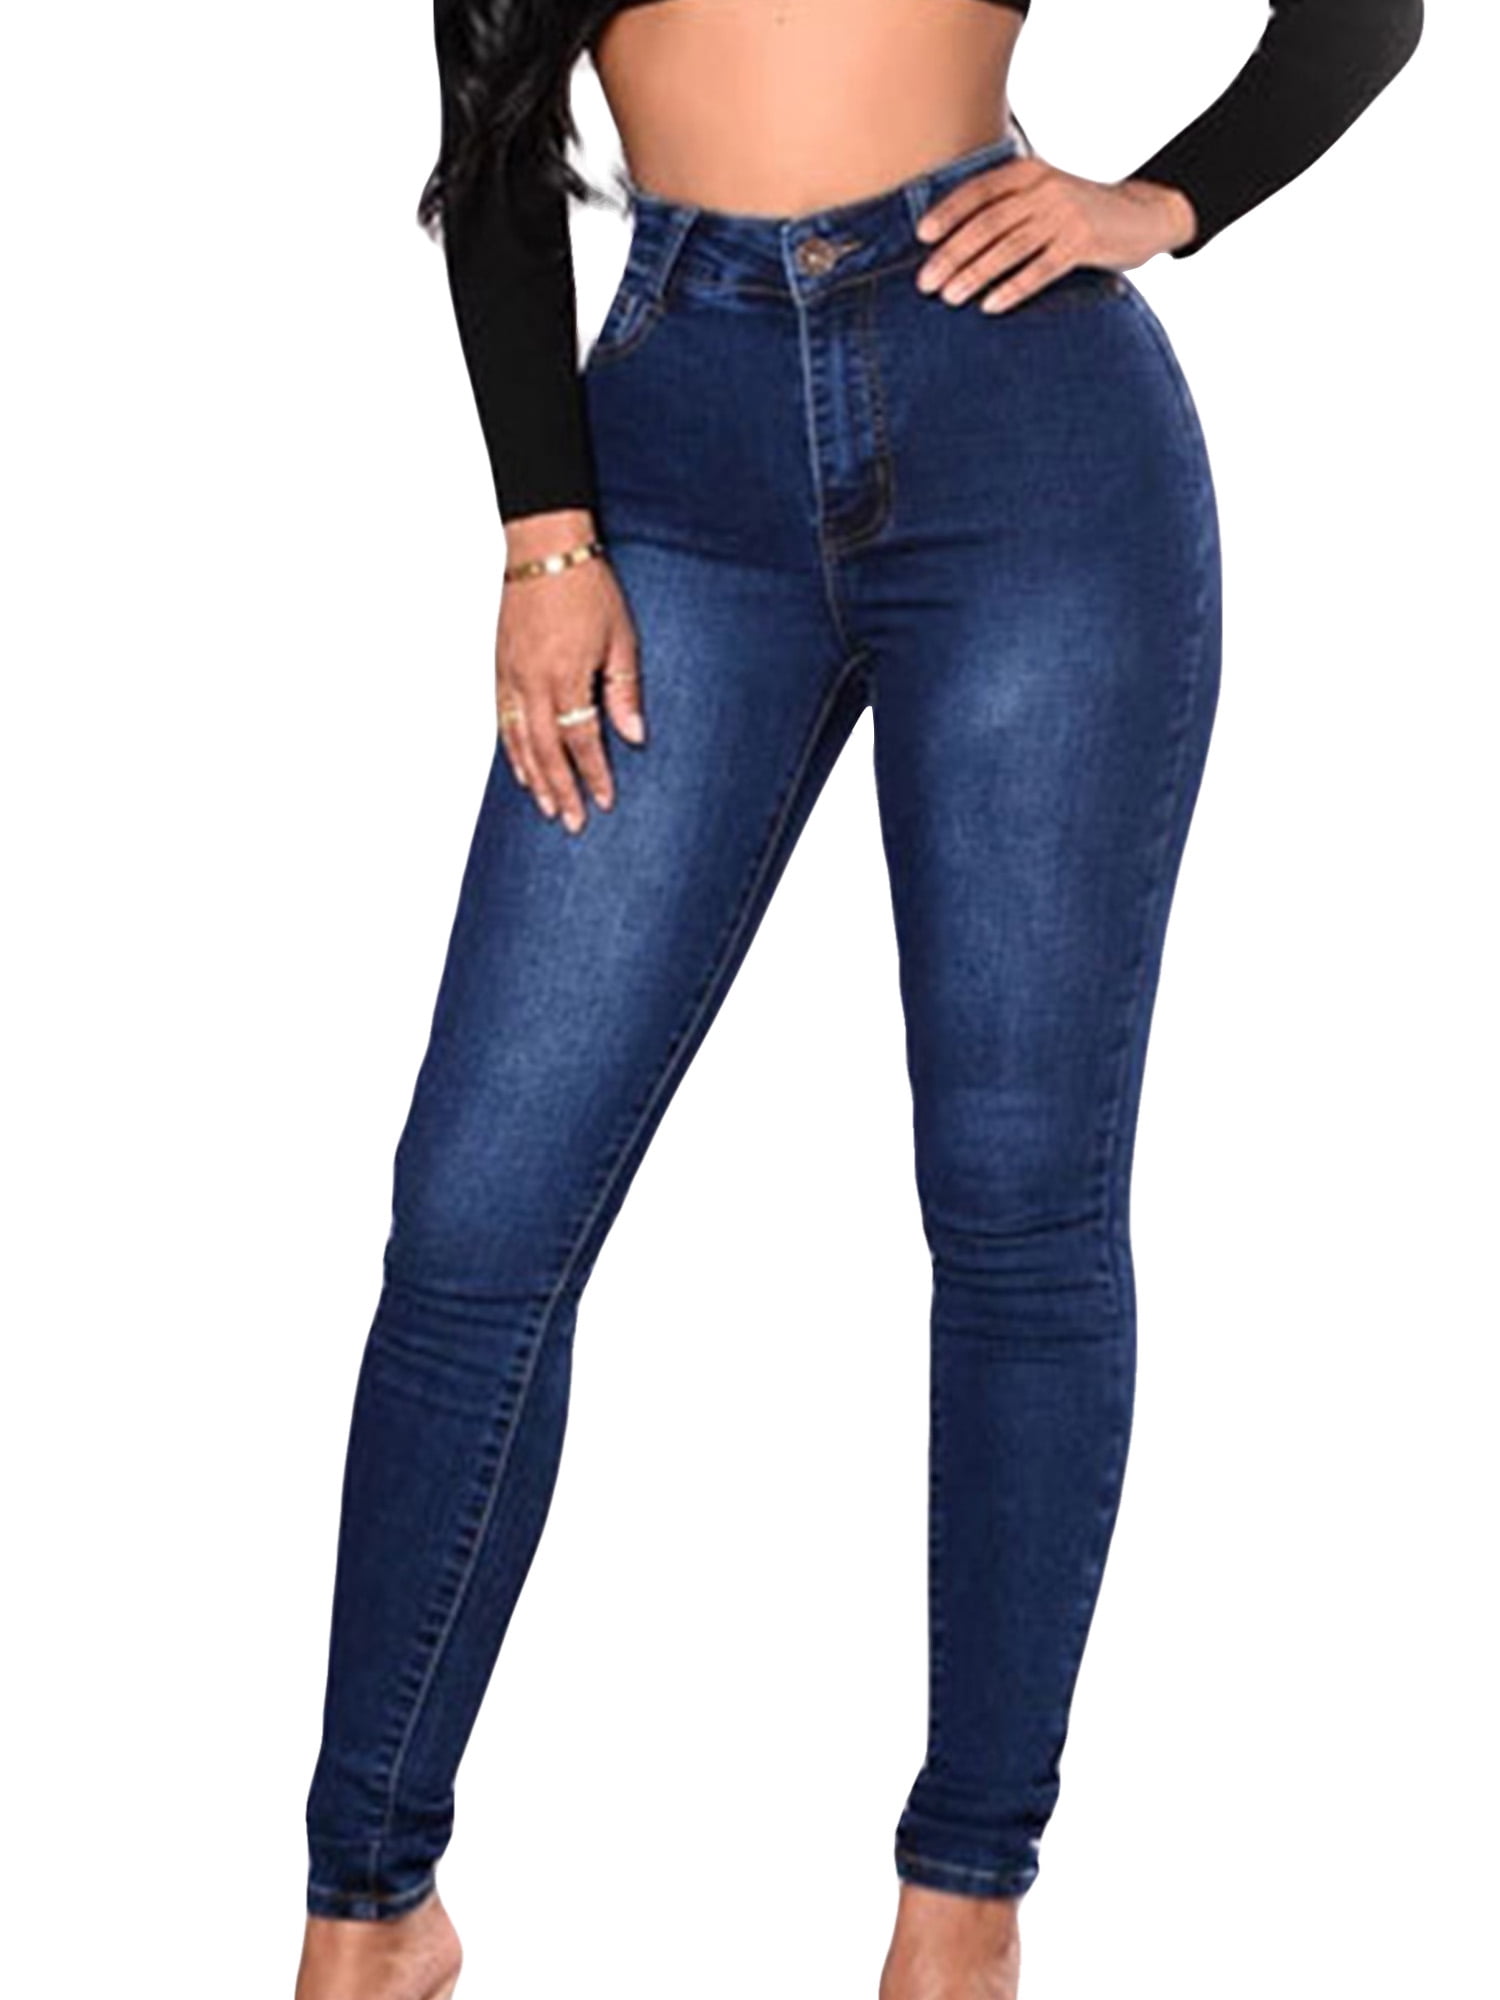 Women High Waisted Stretch Skinny Jeans Denim Pants Ladies Casual Bodycon Jeggings Pencil Pants 839cd28d f8a0 4448 8e47 2aba434418c2.cf6f806cb82f0f592c7b69adc70eae5e